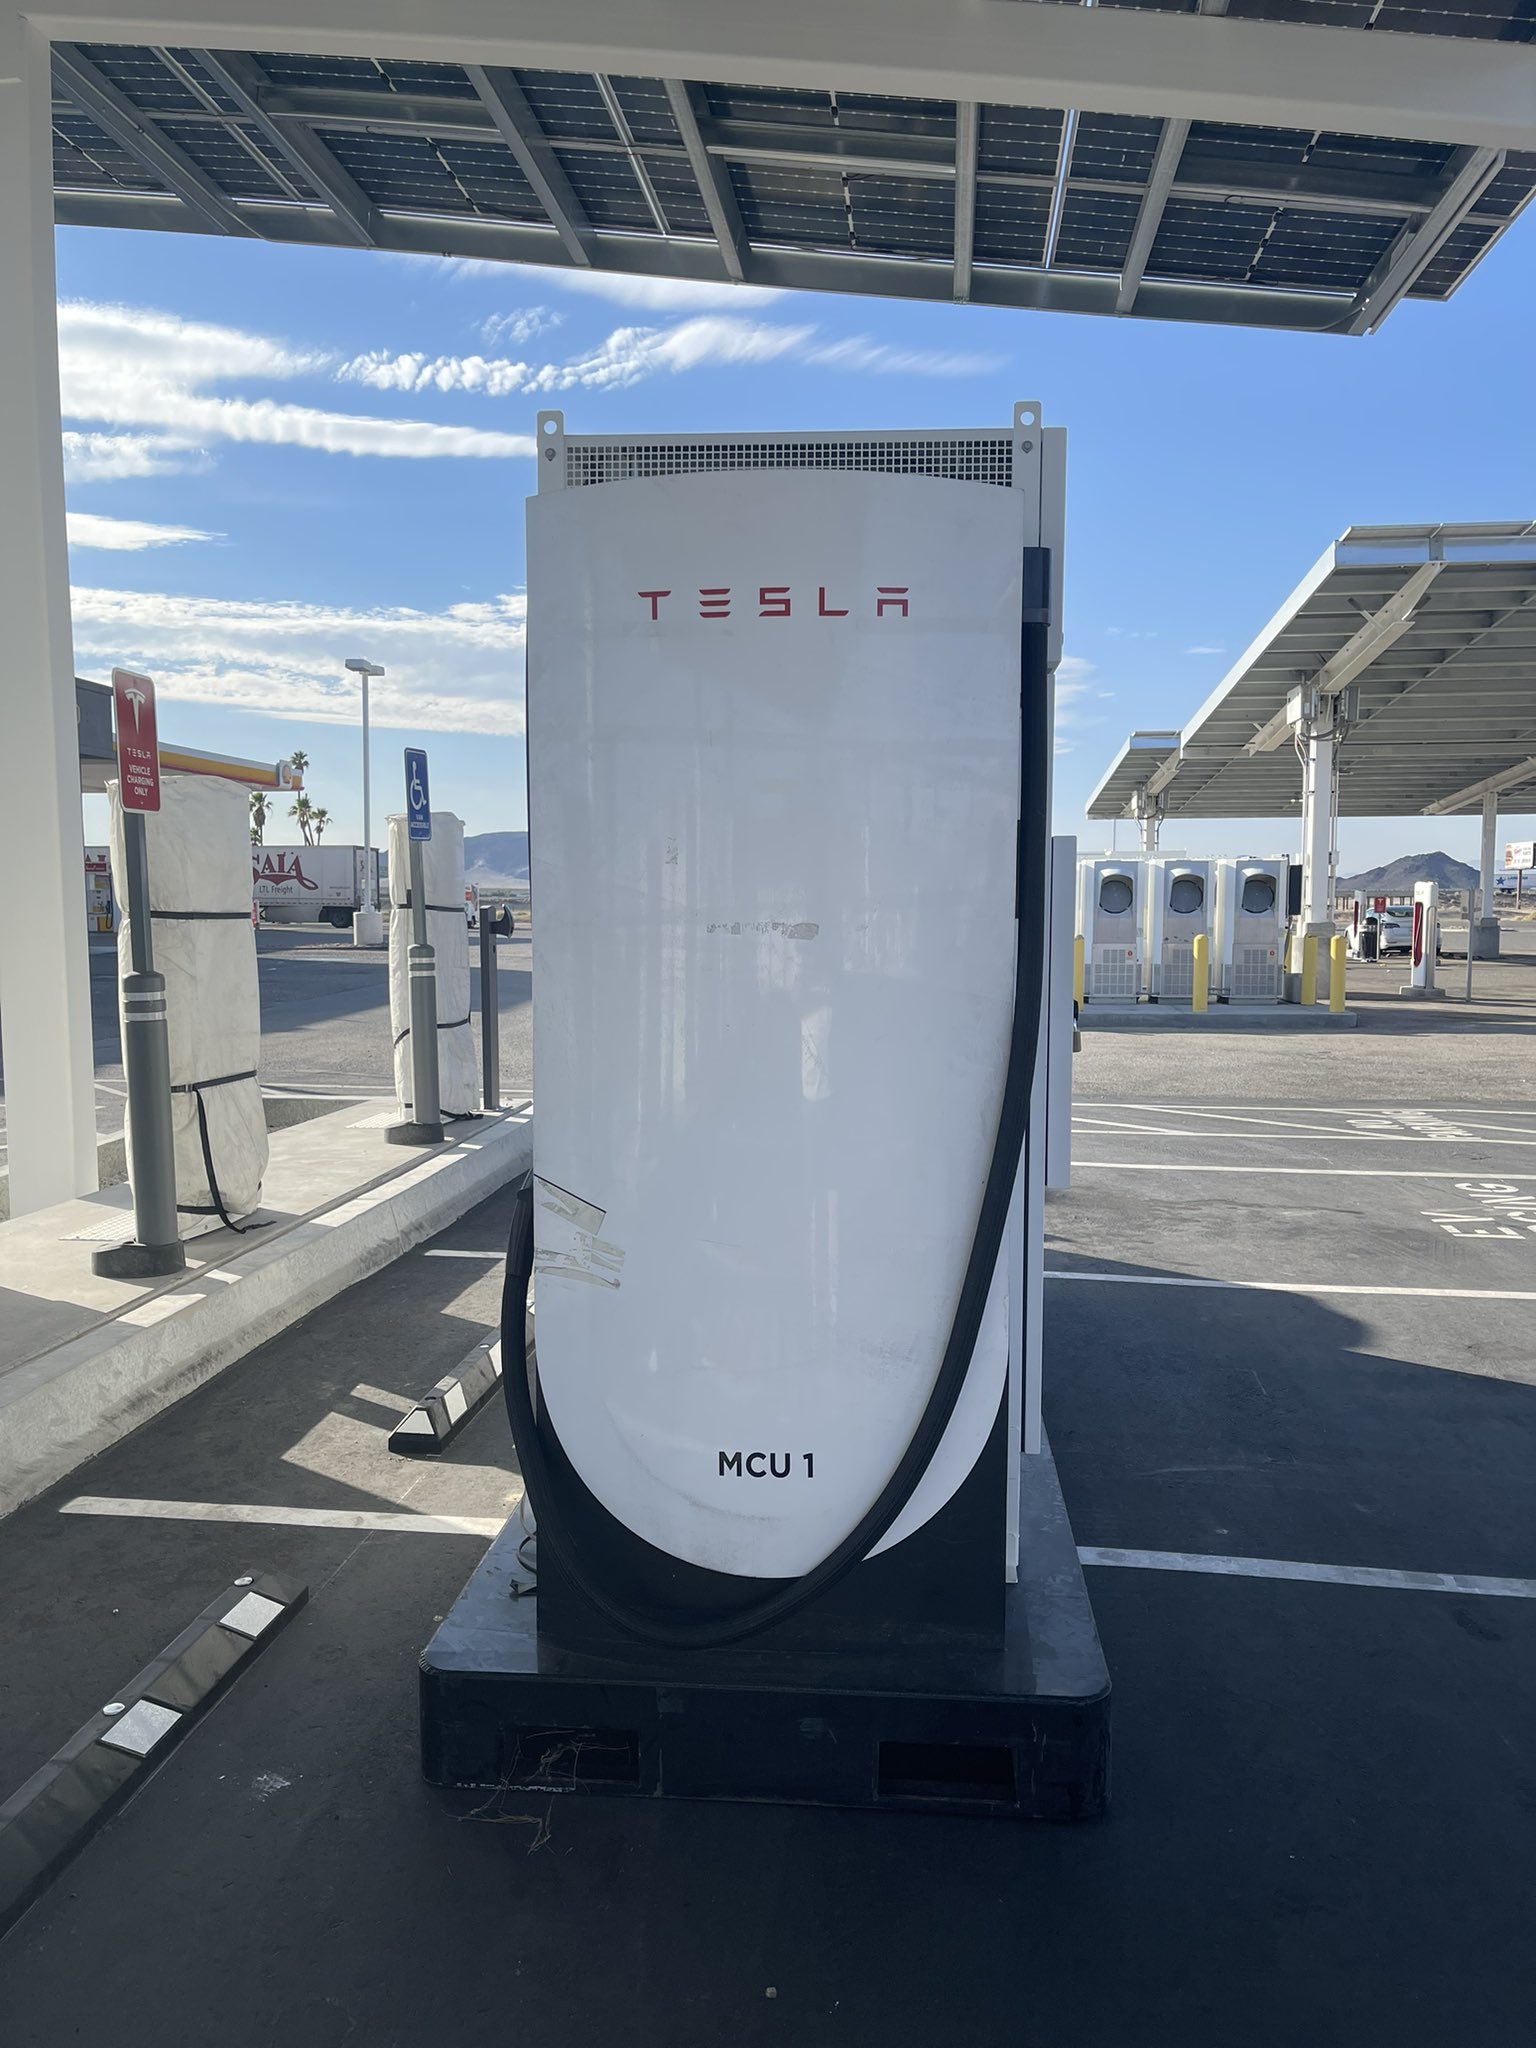 https://e-vehicleinfo.com/global/tesla-megacharger-all-you-need-to-know/